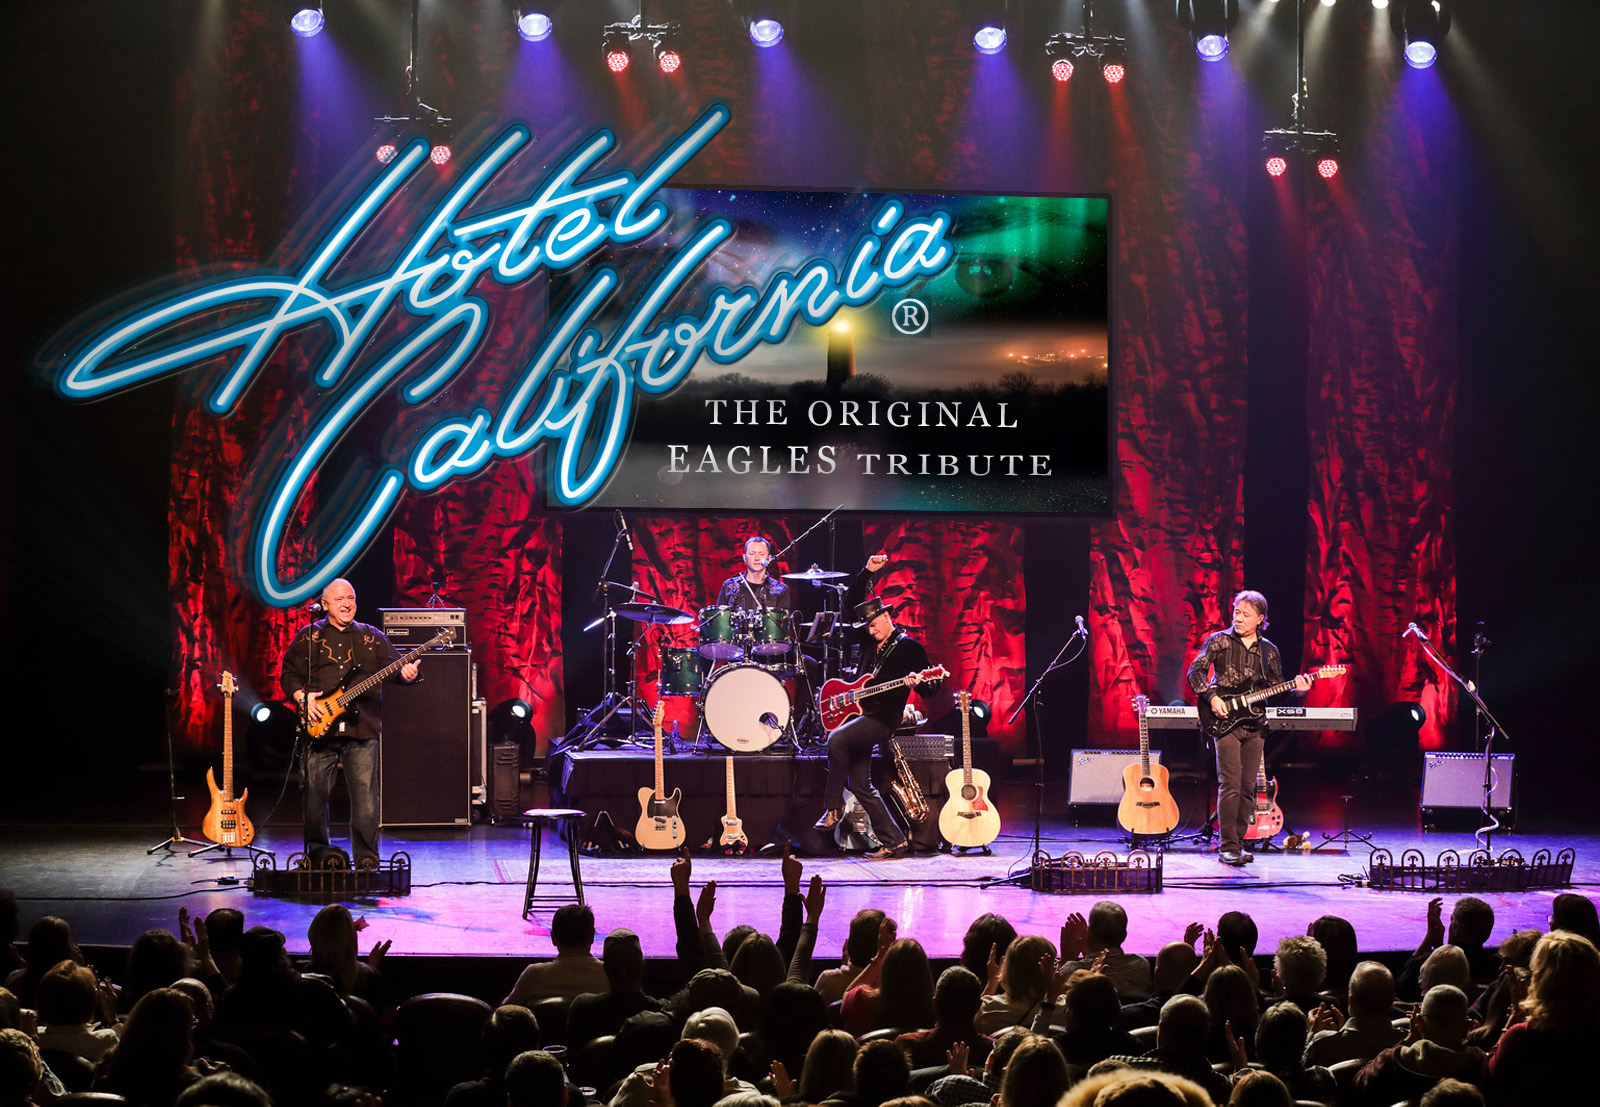 Hotel California - The Original Eagles Tribute logo over photo of band on colorful stage